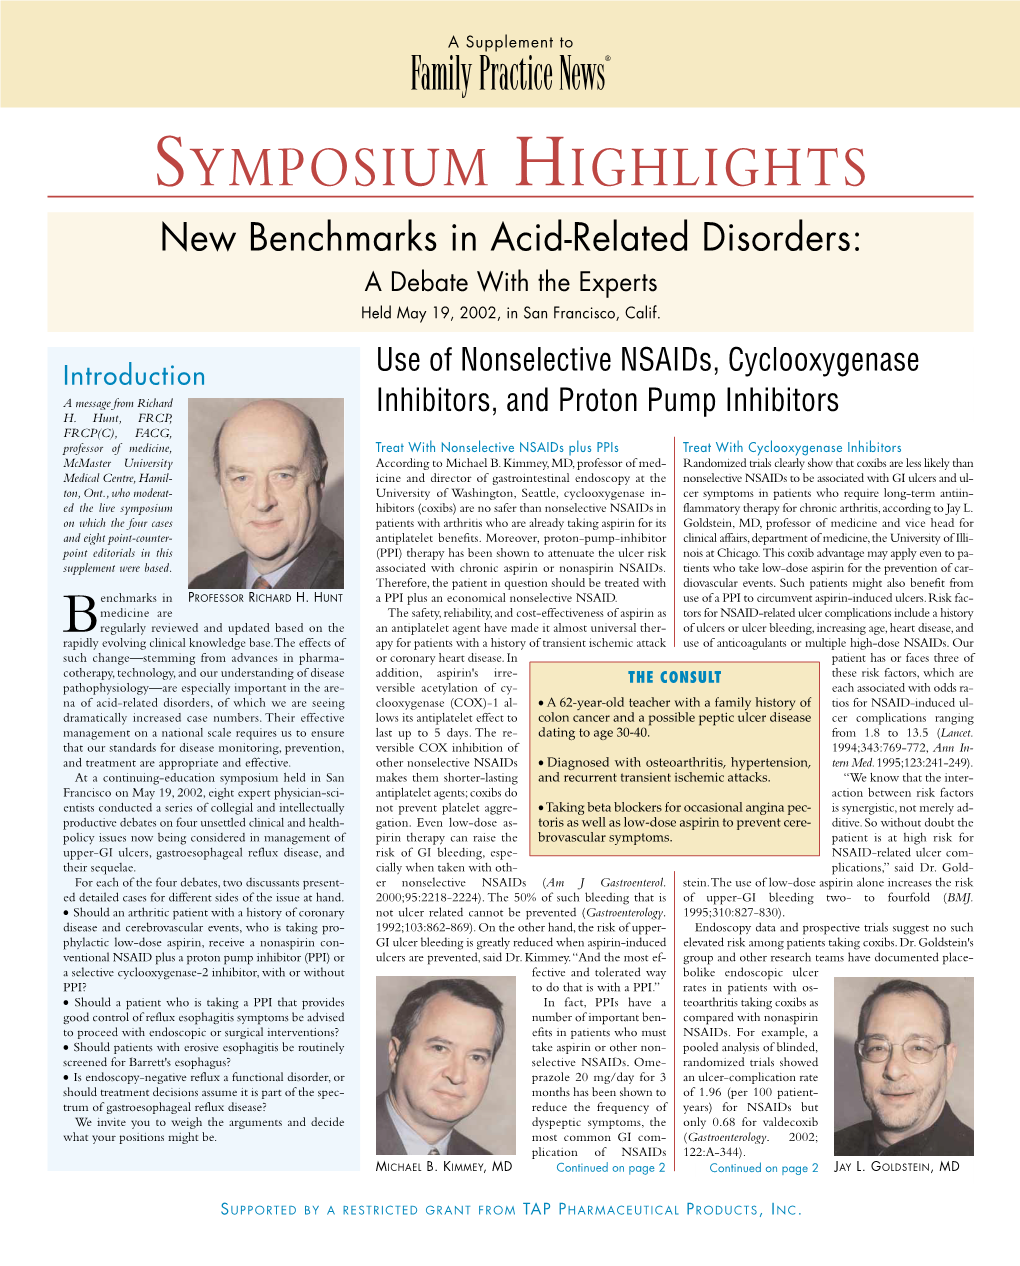 SYMPOSIUM HIGHLIGHTS New Benchmarks in Acid-Related Disorders: a Debate with the Experts Held May 19, 2002, in San Francisco, Calif